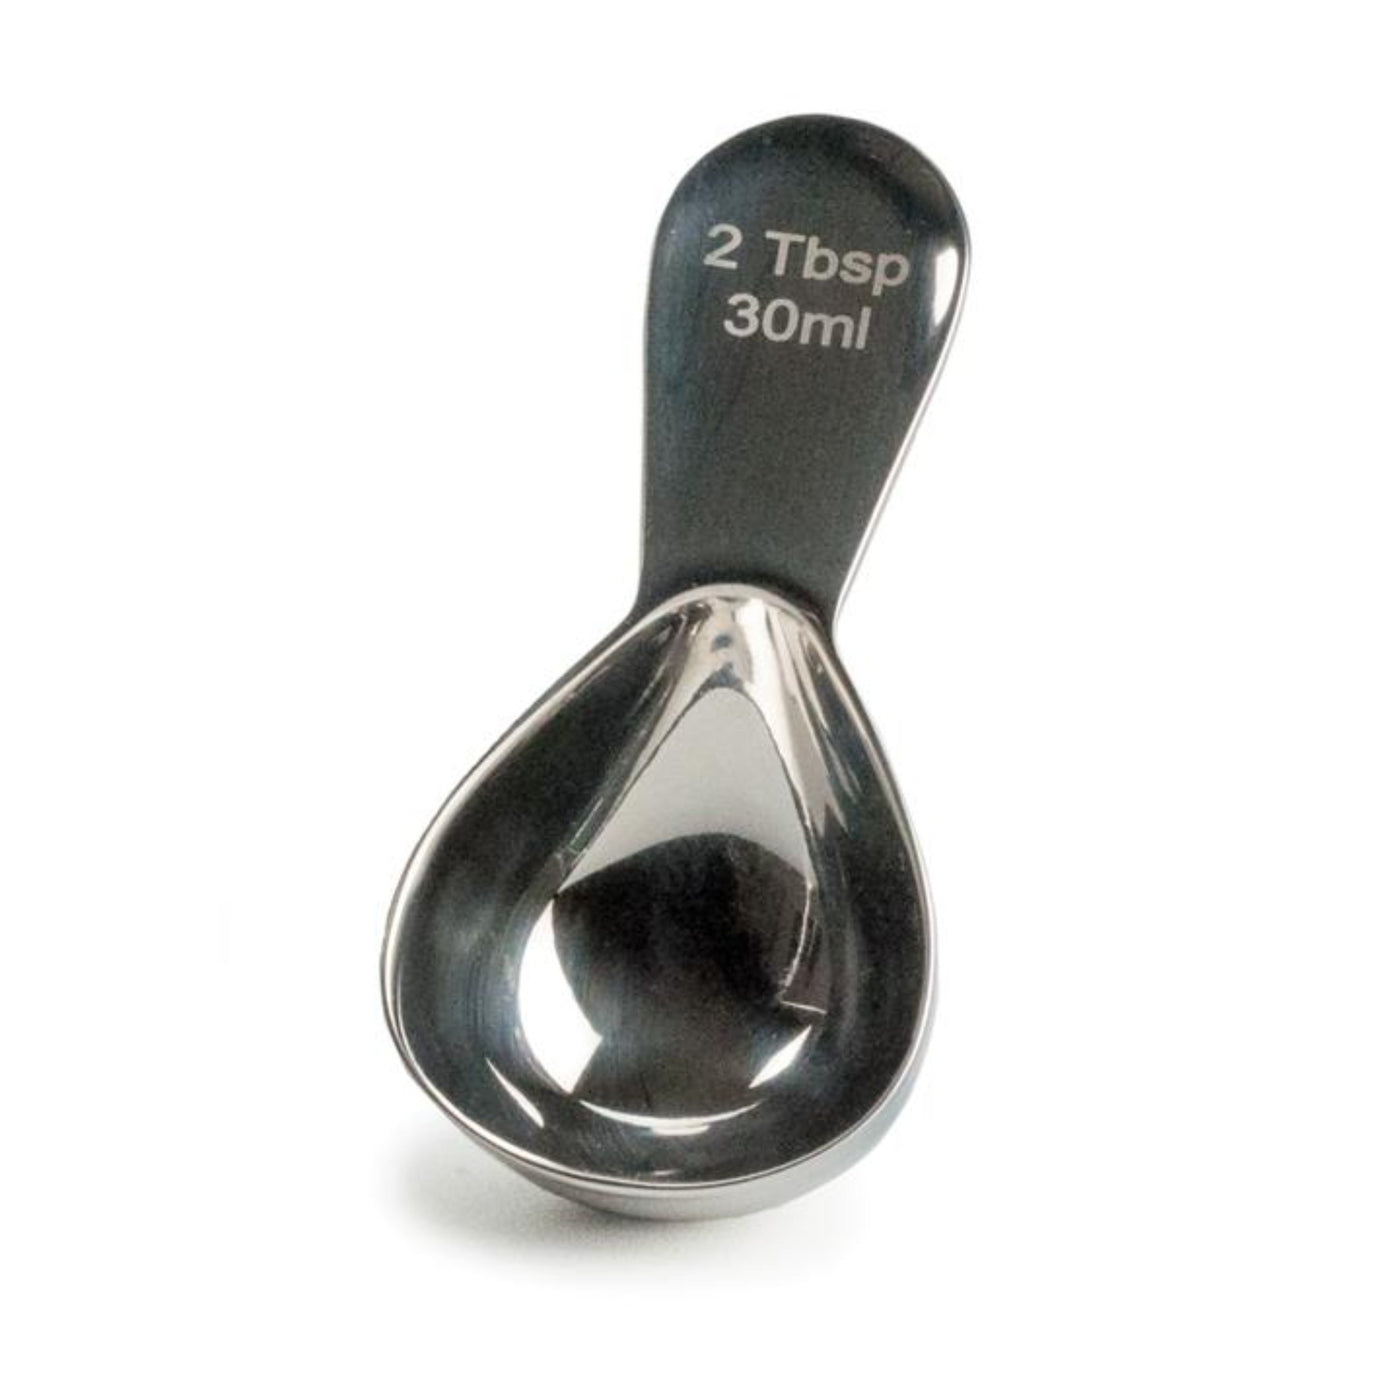 Two Tablespoon Coffee Scoop